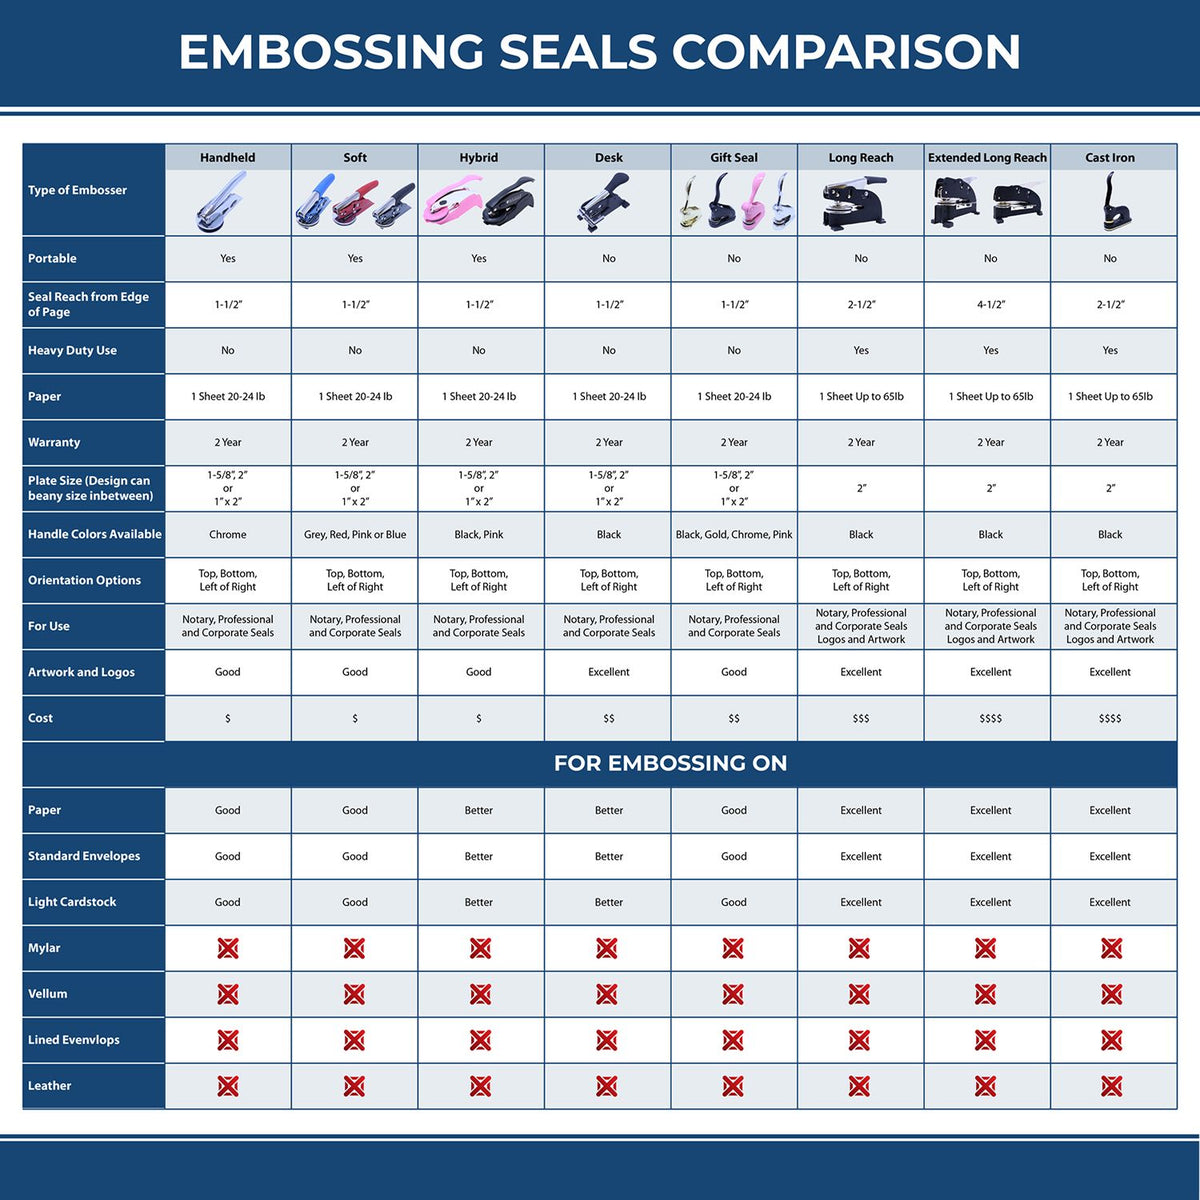 A comparison chart for the different types of mount models available for the Heavy Duty Cast Iron Nevada Architect Embosser.